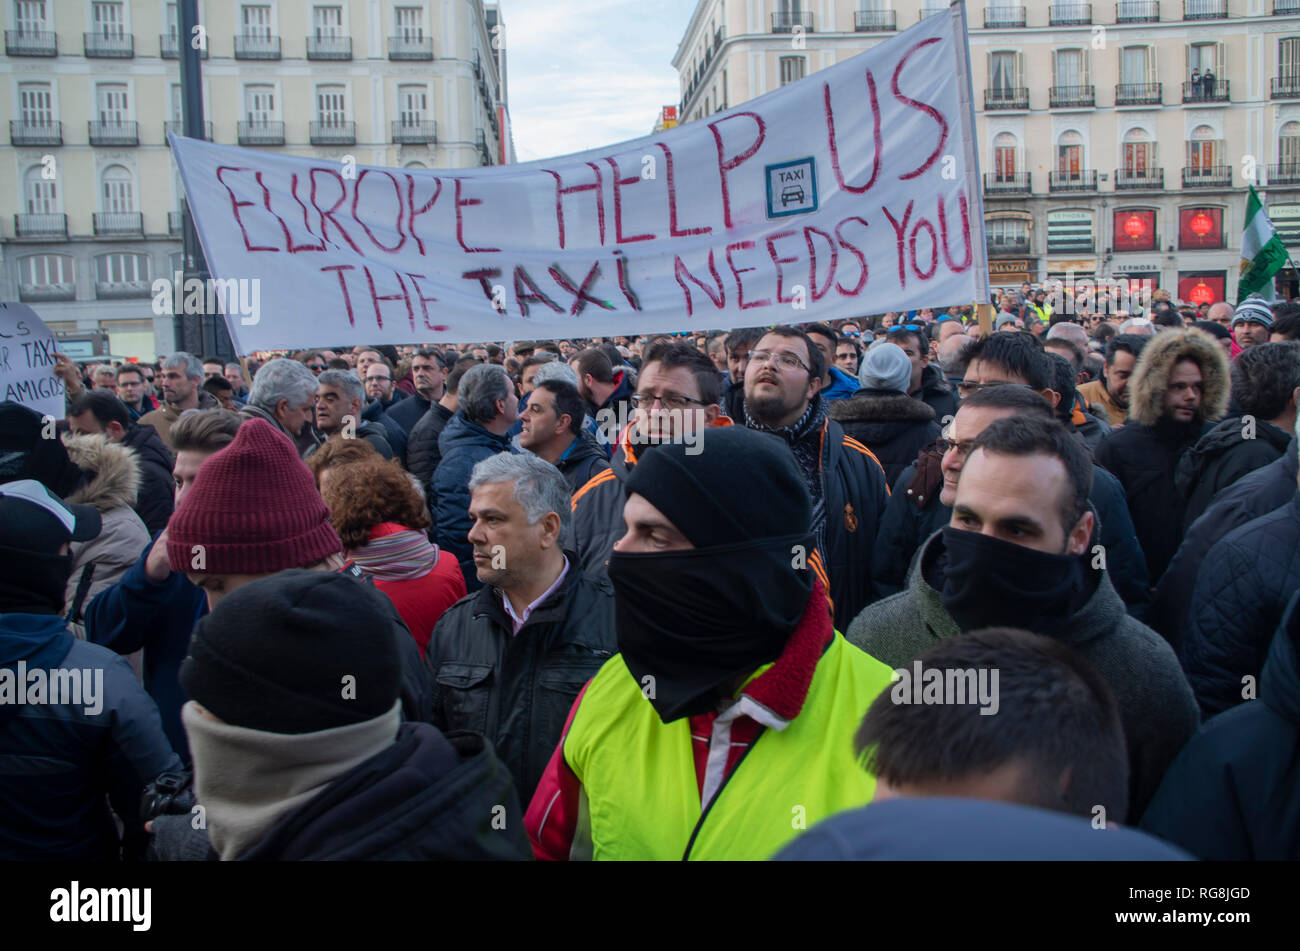 Madrid, Spain. 28th January 2019. Taxi drivers in Madrid have been on a strike for more than a week demanding the prohibition of Uber and Cabify in the Spanish capital-city.   Due to a lack of agreement, hundreds of taxi drivers protested at Puerta del Sol, Madrid’s central square.  In the picture taxi drivers are protesting with a placard asking support from the European Union. Credit: Lora Grigorova/Alamy Live News Stock Photo